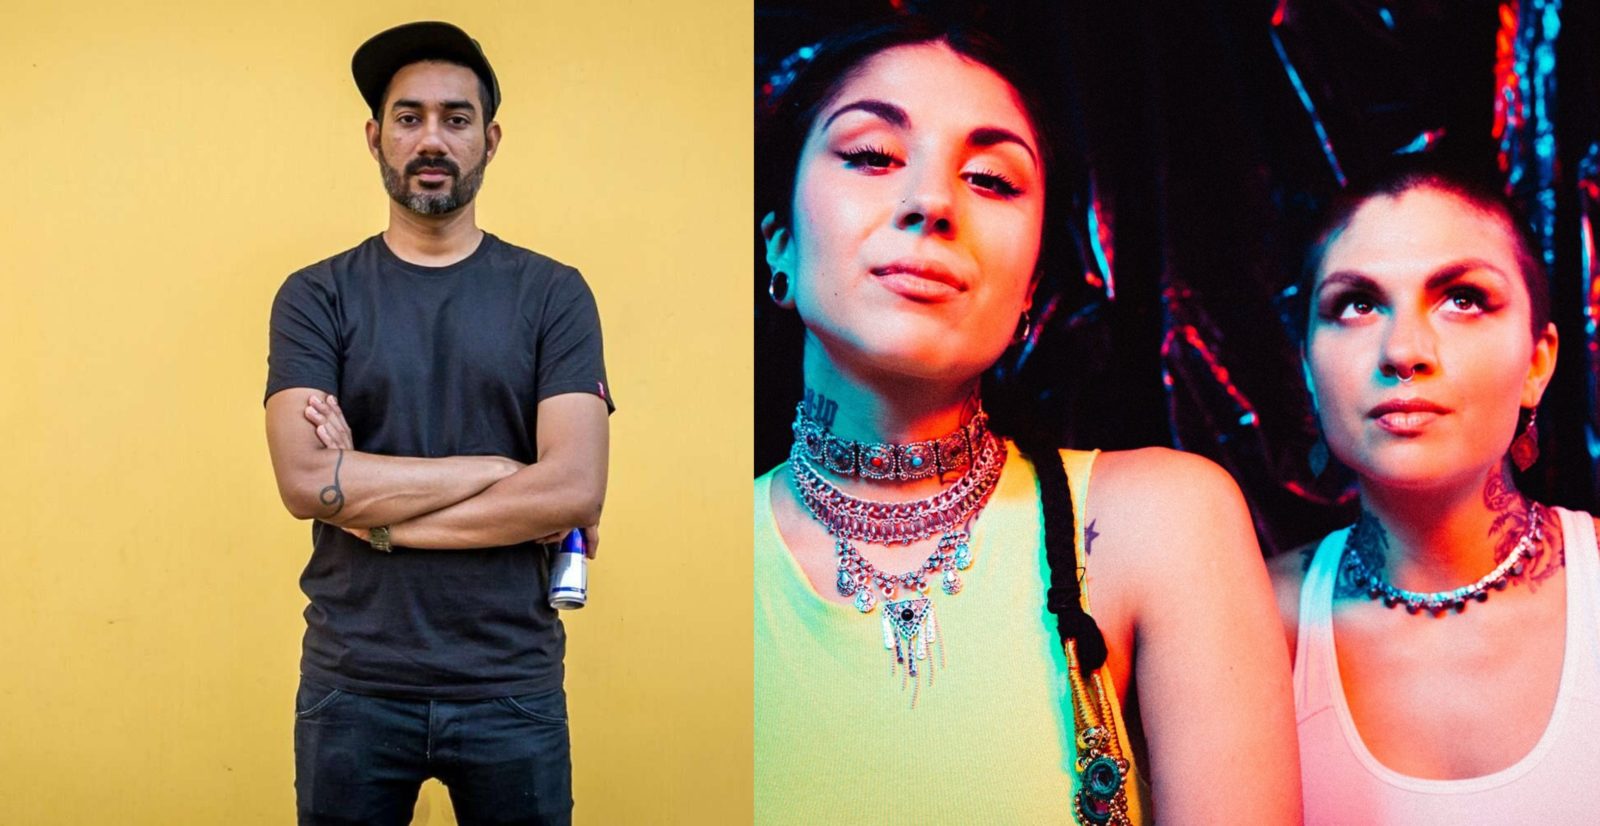 Krewella And Nucleya releases "Good On You" (Official Lyric Video)